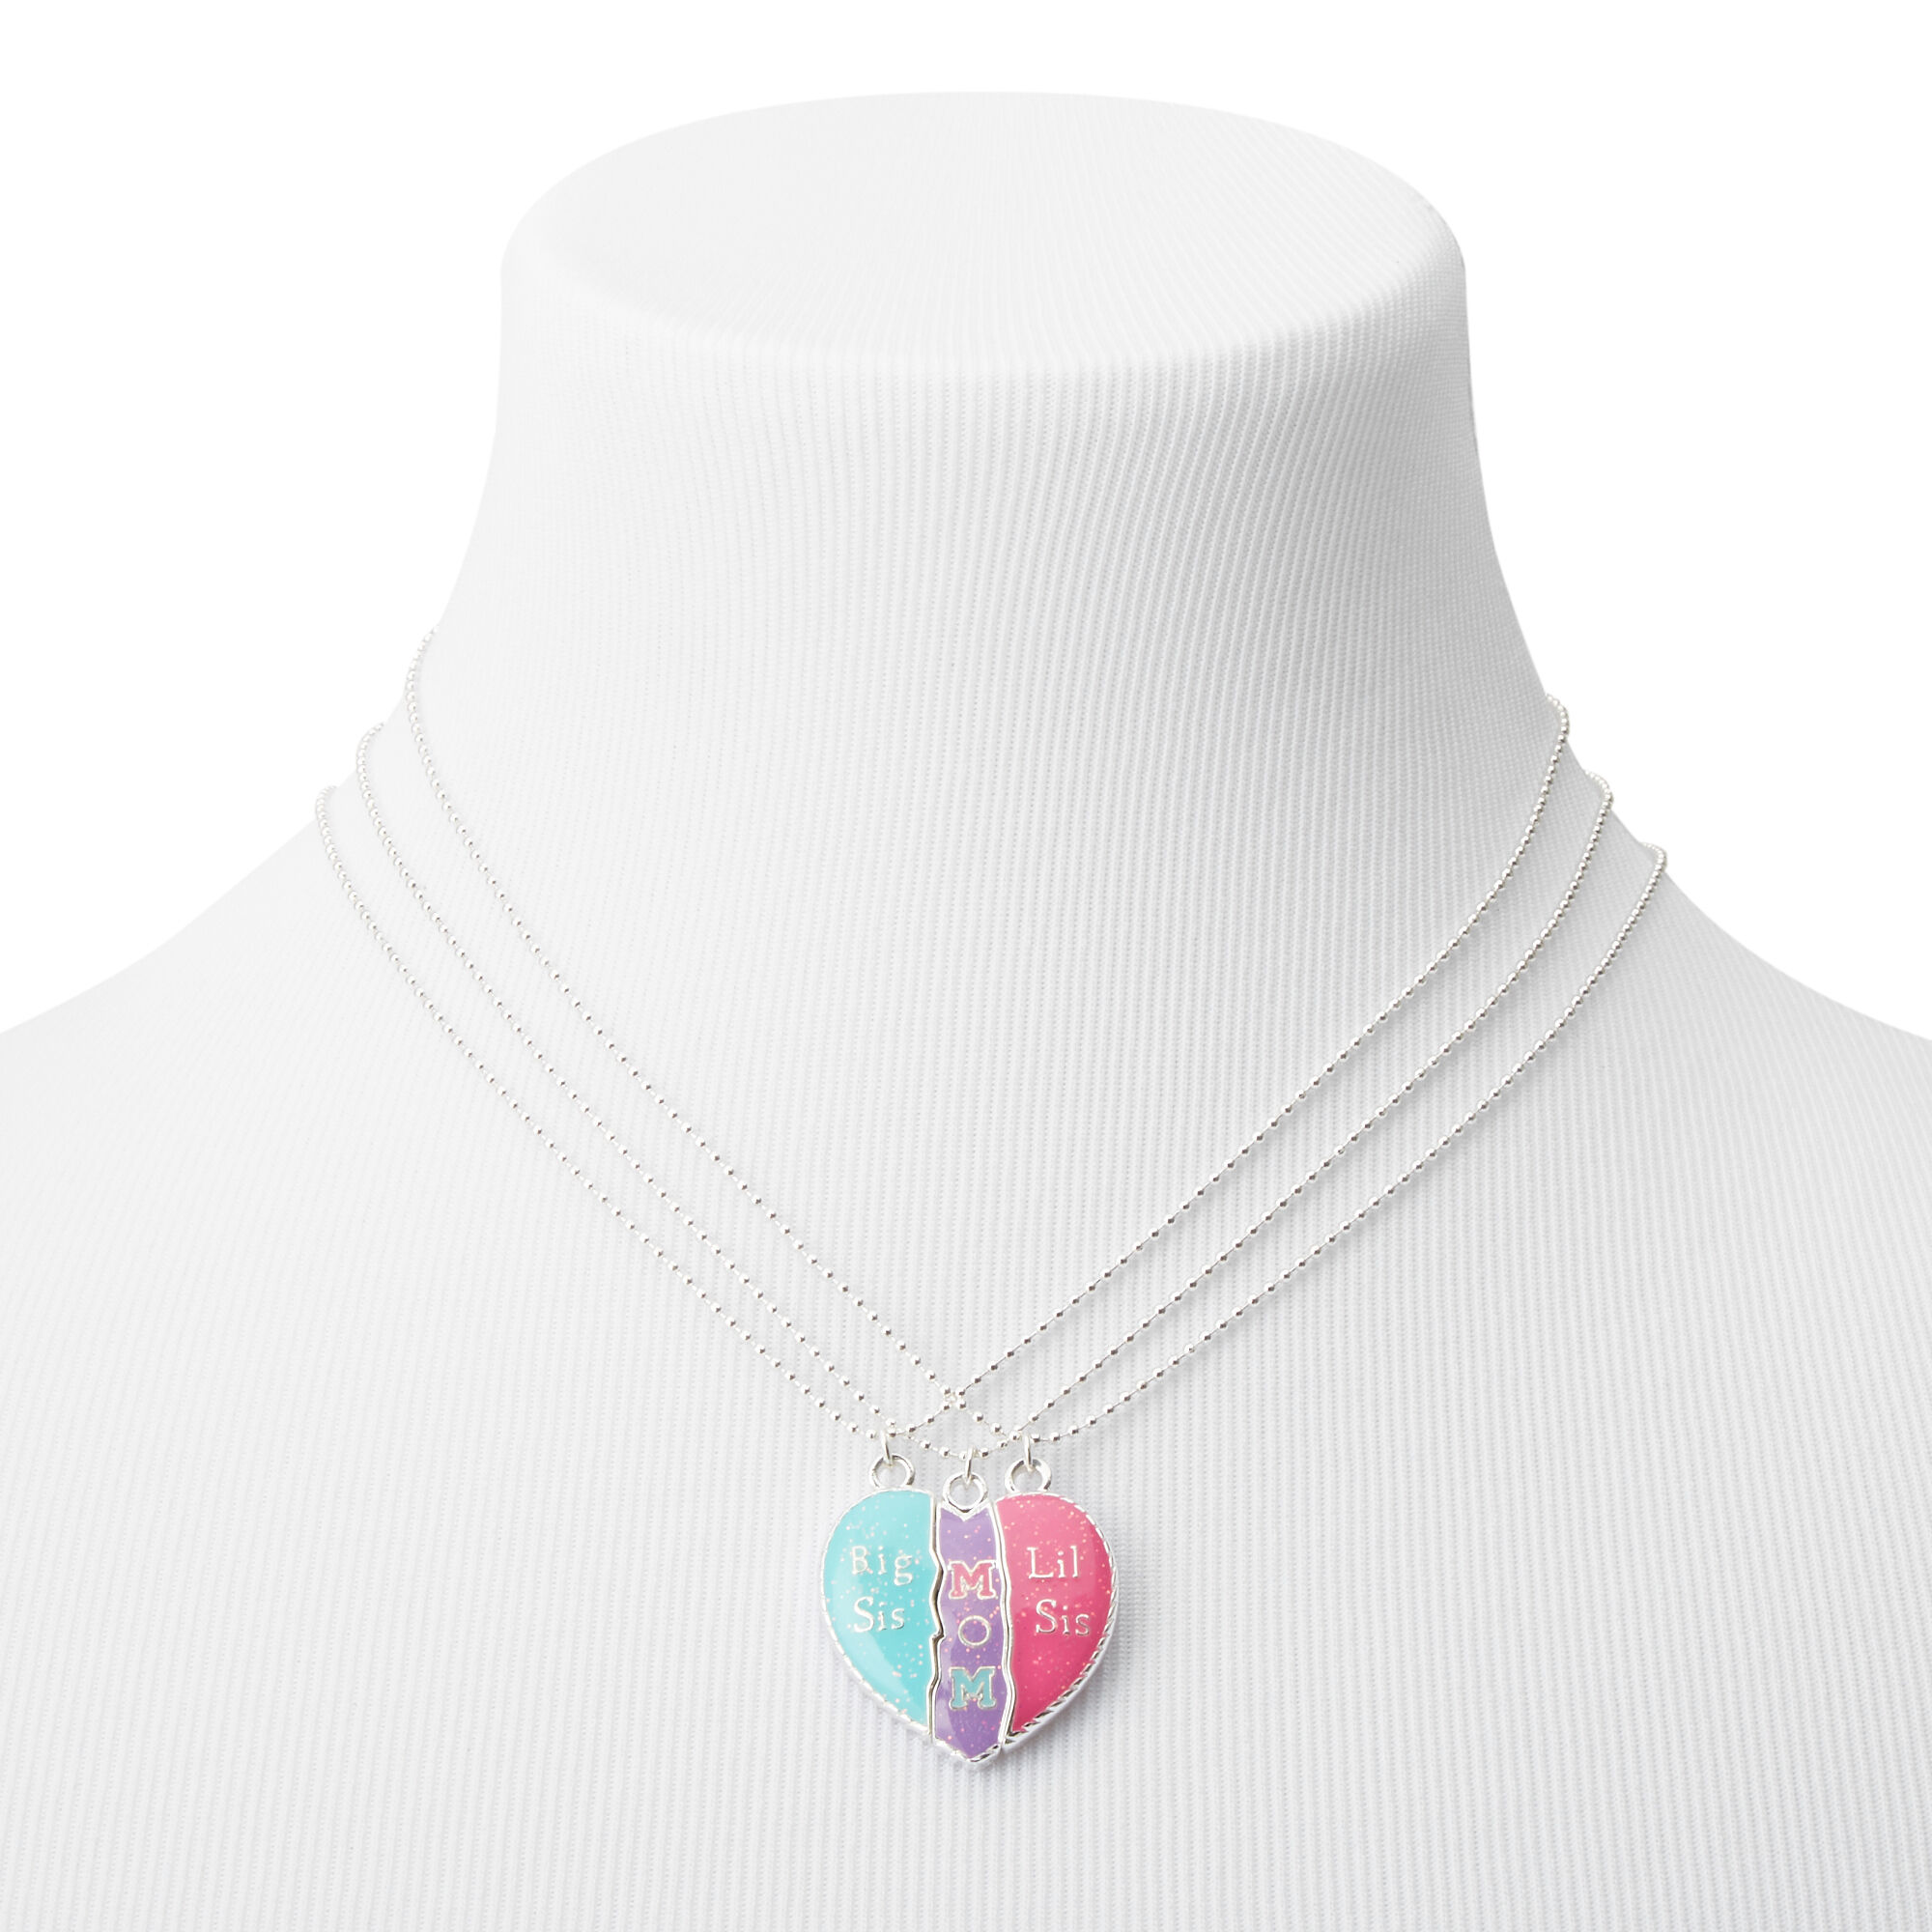 Enamel Broken Heart Big Sis Mom Lil Sis Necklace Best Friends Sisters Stack Necklace  Jewelry For Women Children From Endlesssea9208, $1.43 | DHgate.Com